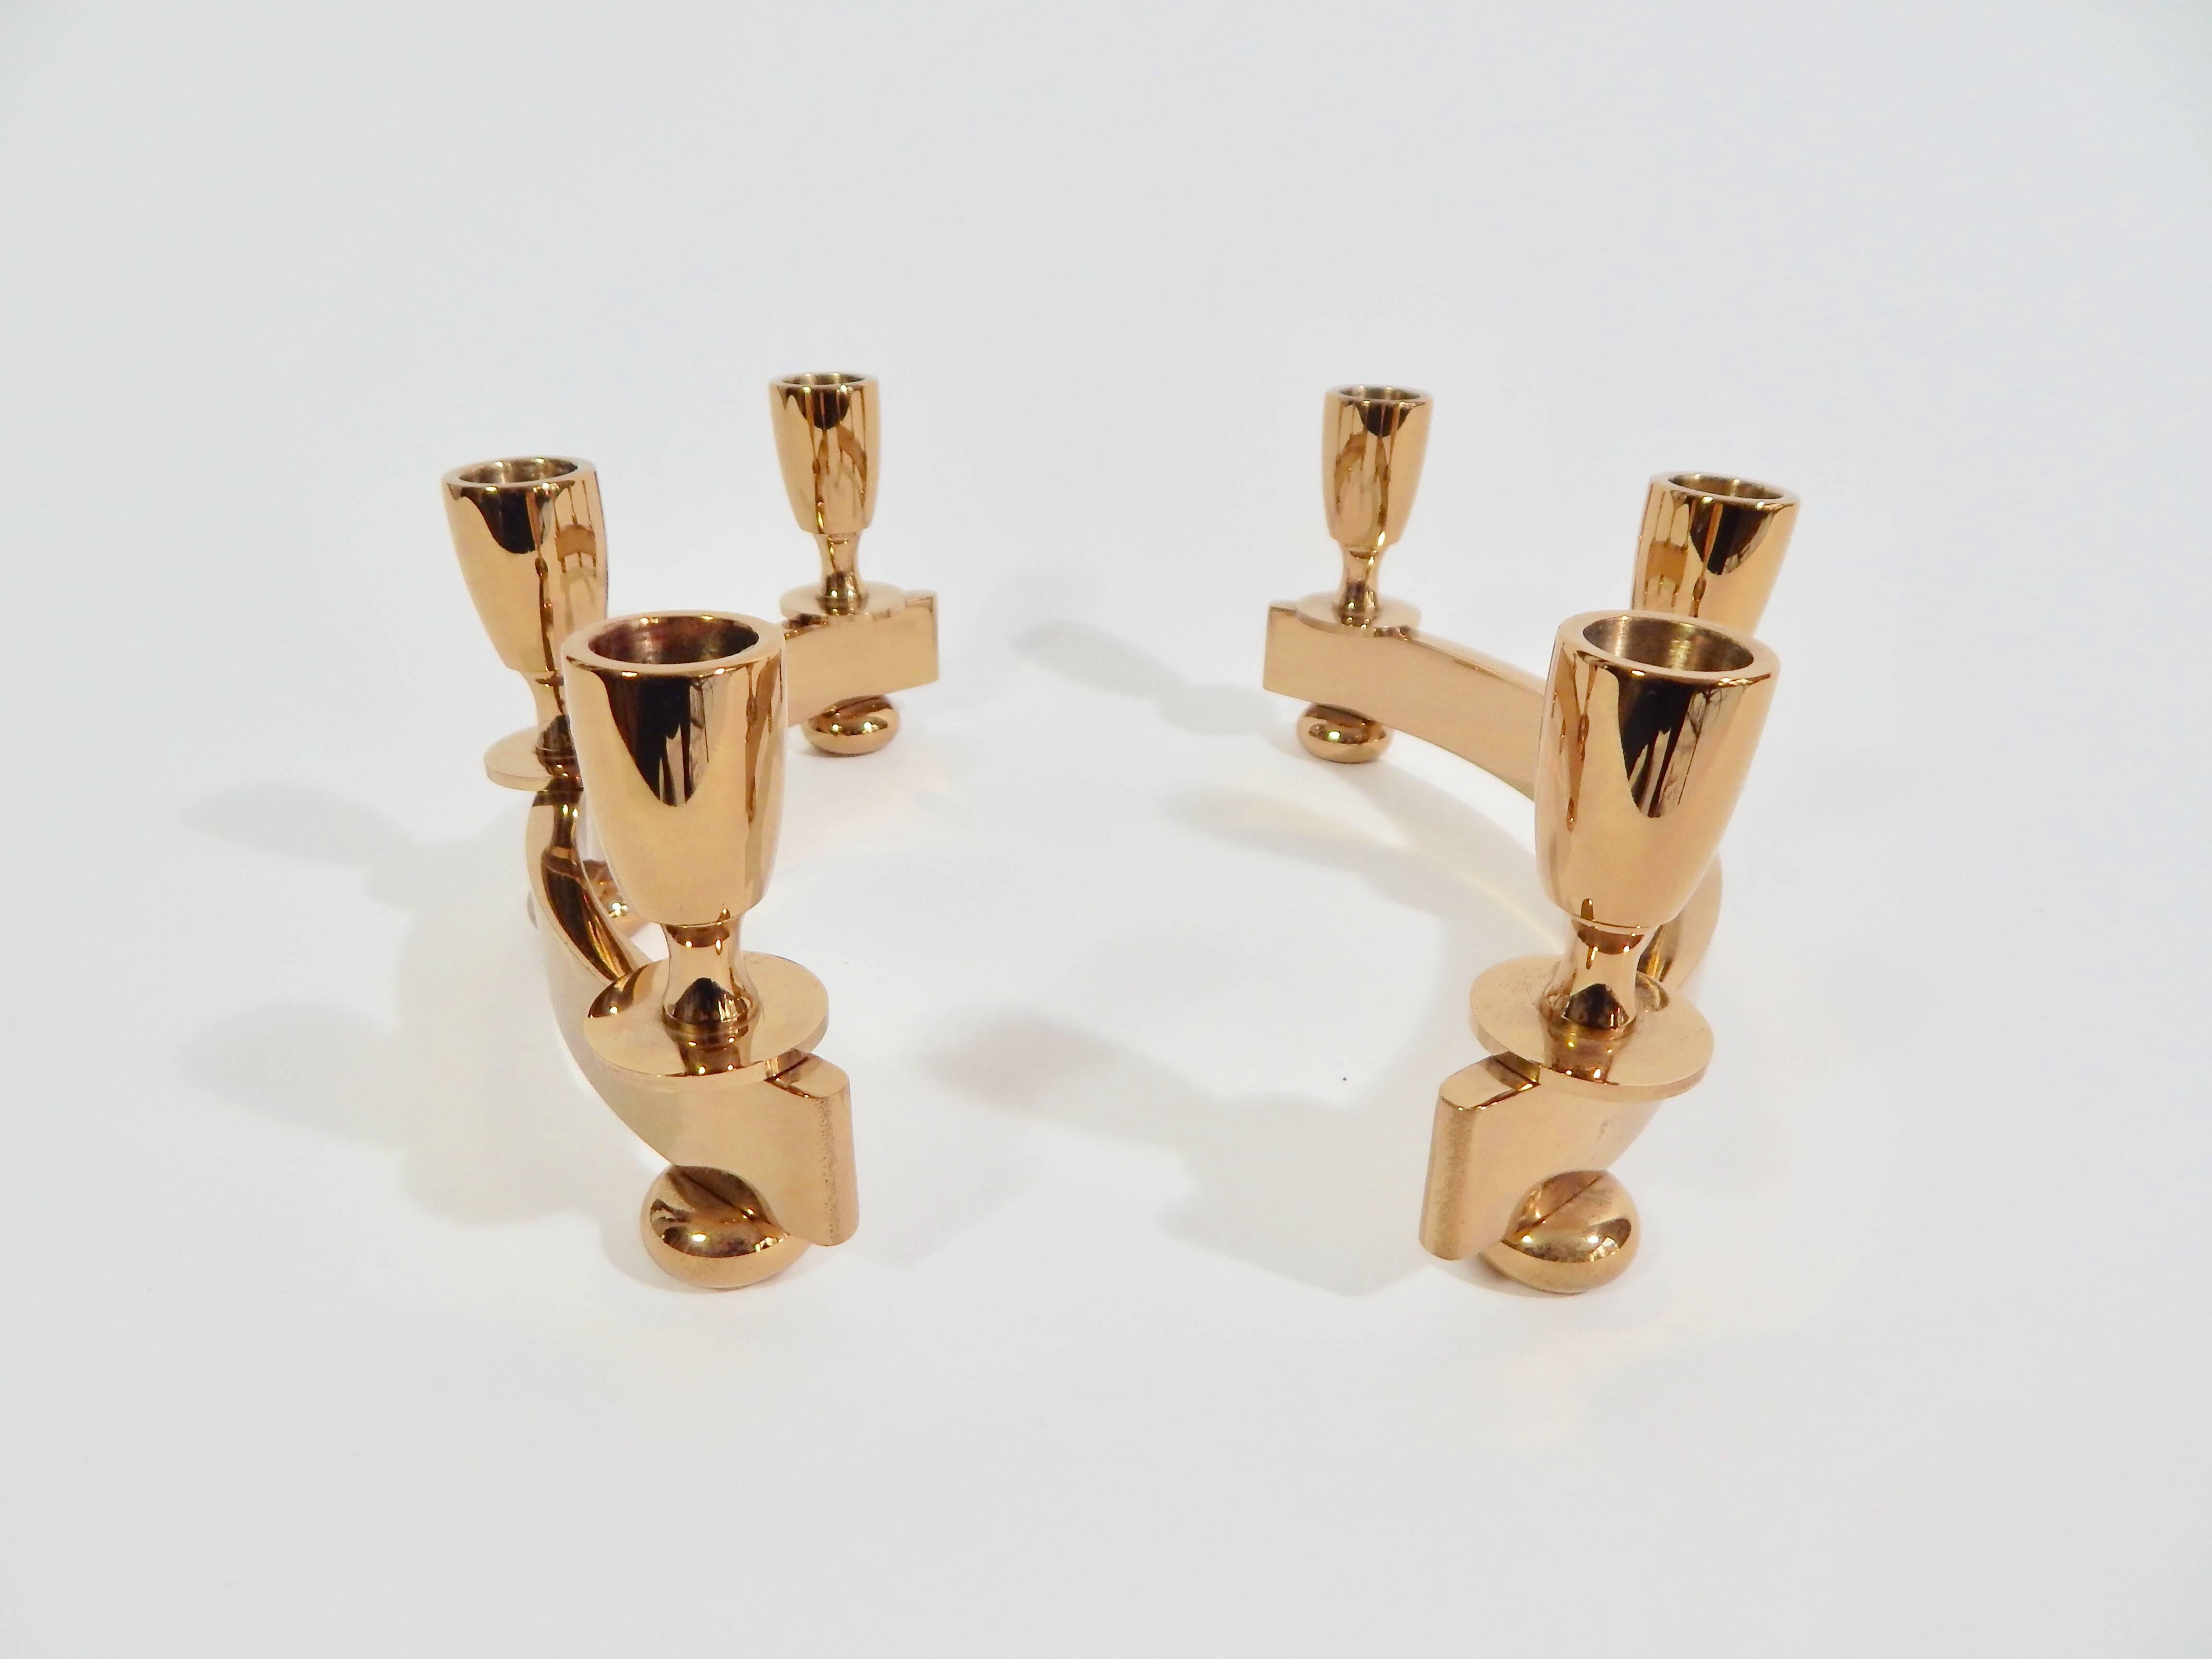 Gorgous pair of Mid Century Art Deco inspired solid brass candlesticks or candelabras.